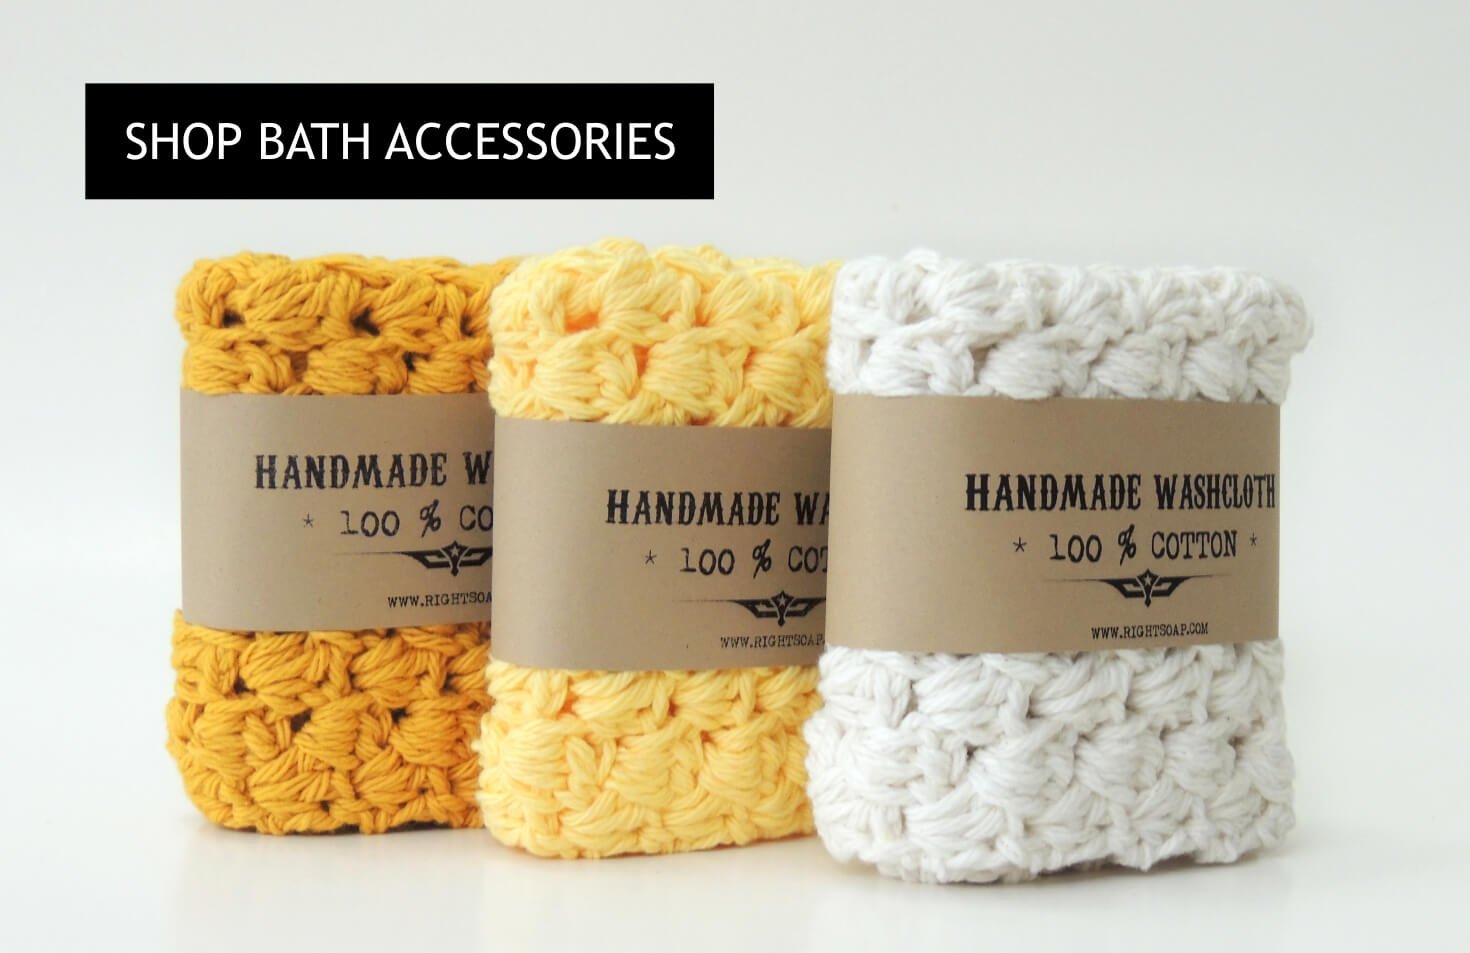 https://www.rightsoap.com/wp-content/uploads/2019/05/SHOP-BATH-ACCESSORIES-RIGHT-SOAPS-WASHCLOTH-AND-FACE-SCRUBBIES-.jpg